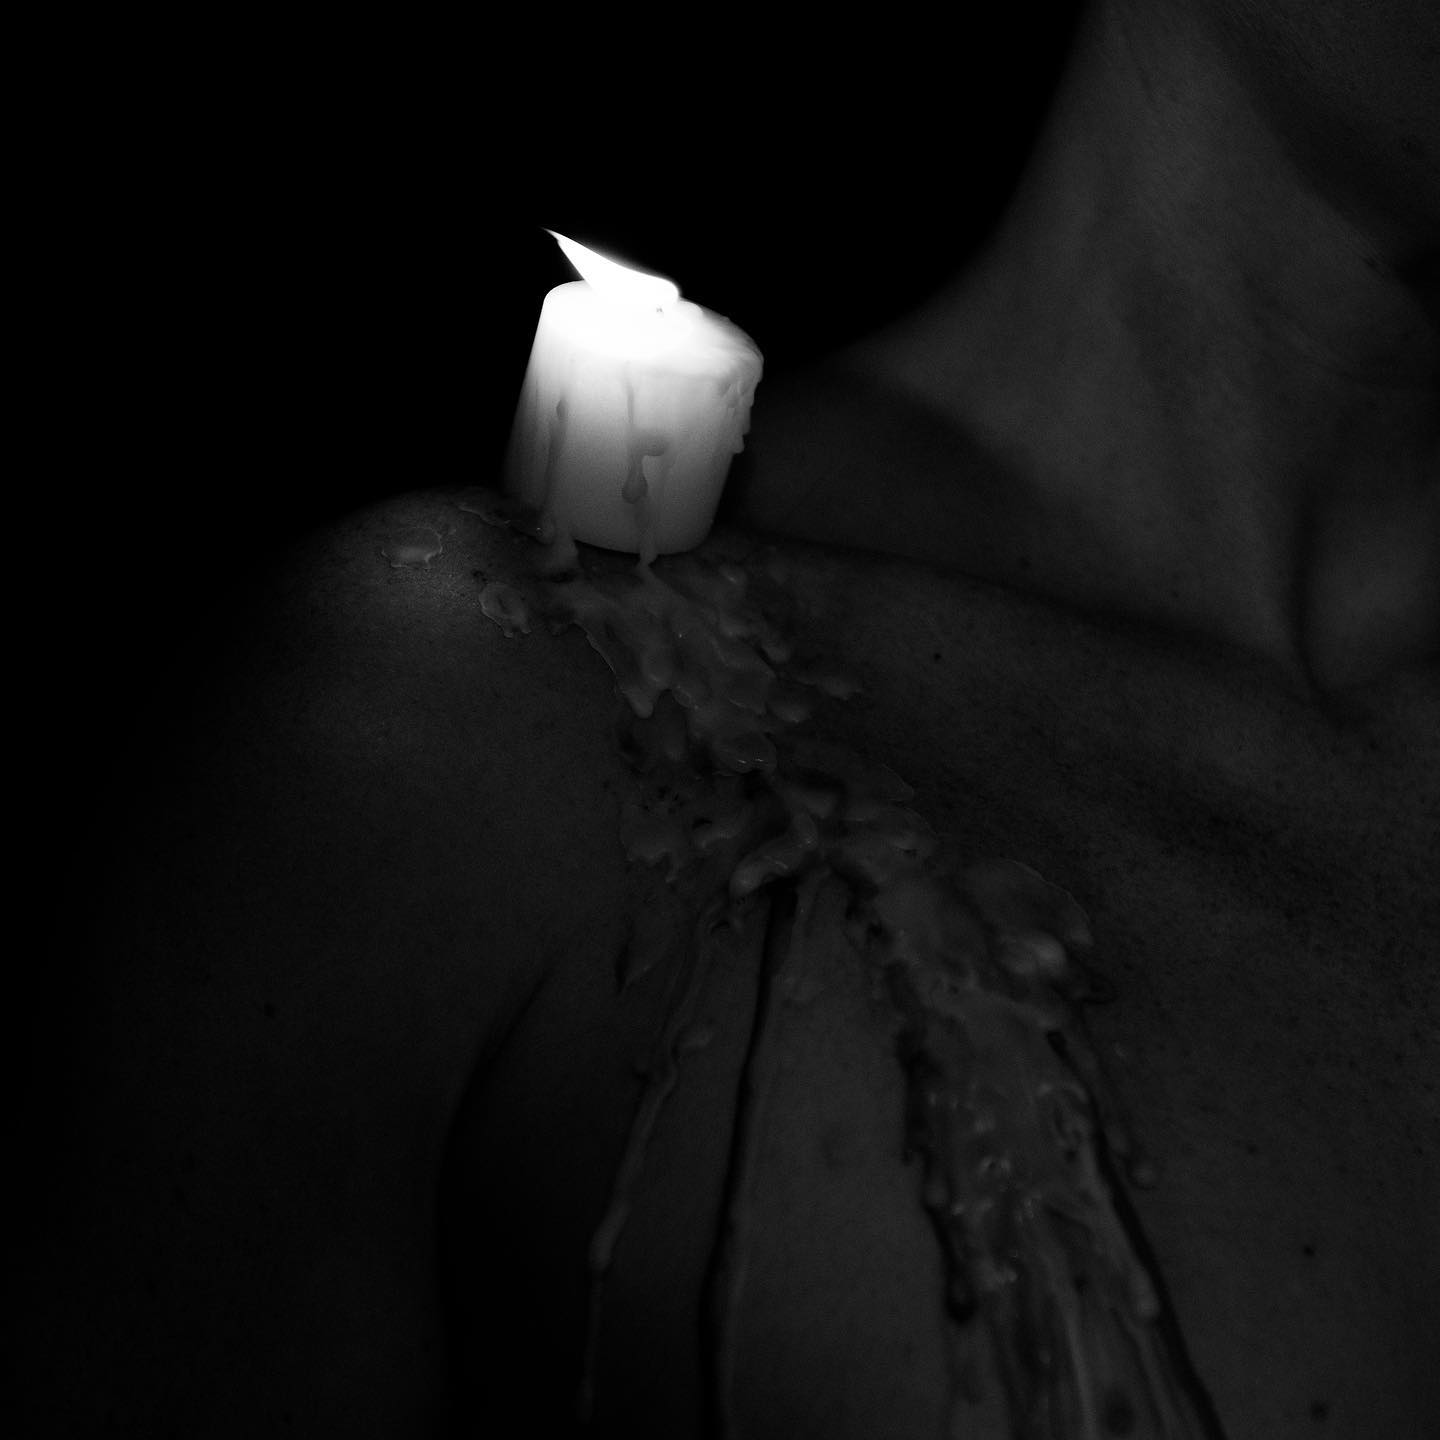 .
.
We’ve all got both light & dark inside us. What matters is the part we choose to act on.
.
📸 @photo_doctor100 
.
#sportysweetcheeks #dark #light #candle #shadow #wax #waxplay #hotwax #candlelight #lowlight #photodoctor #model #modeling #connecticutmodels #sensuality #sensualphotography #sensual_art #implied #art #photogram #photography #beauty #details #burningcandle #mood #aesthetic #boudoir #éroticart #erotique #nsfwposts